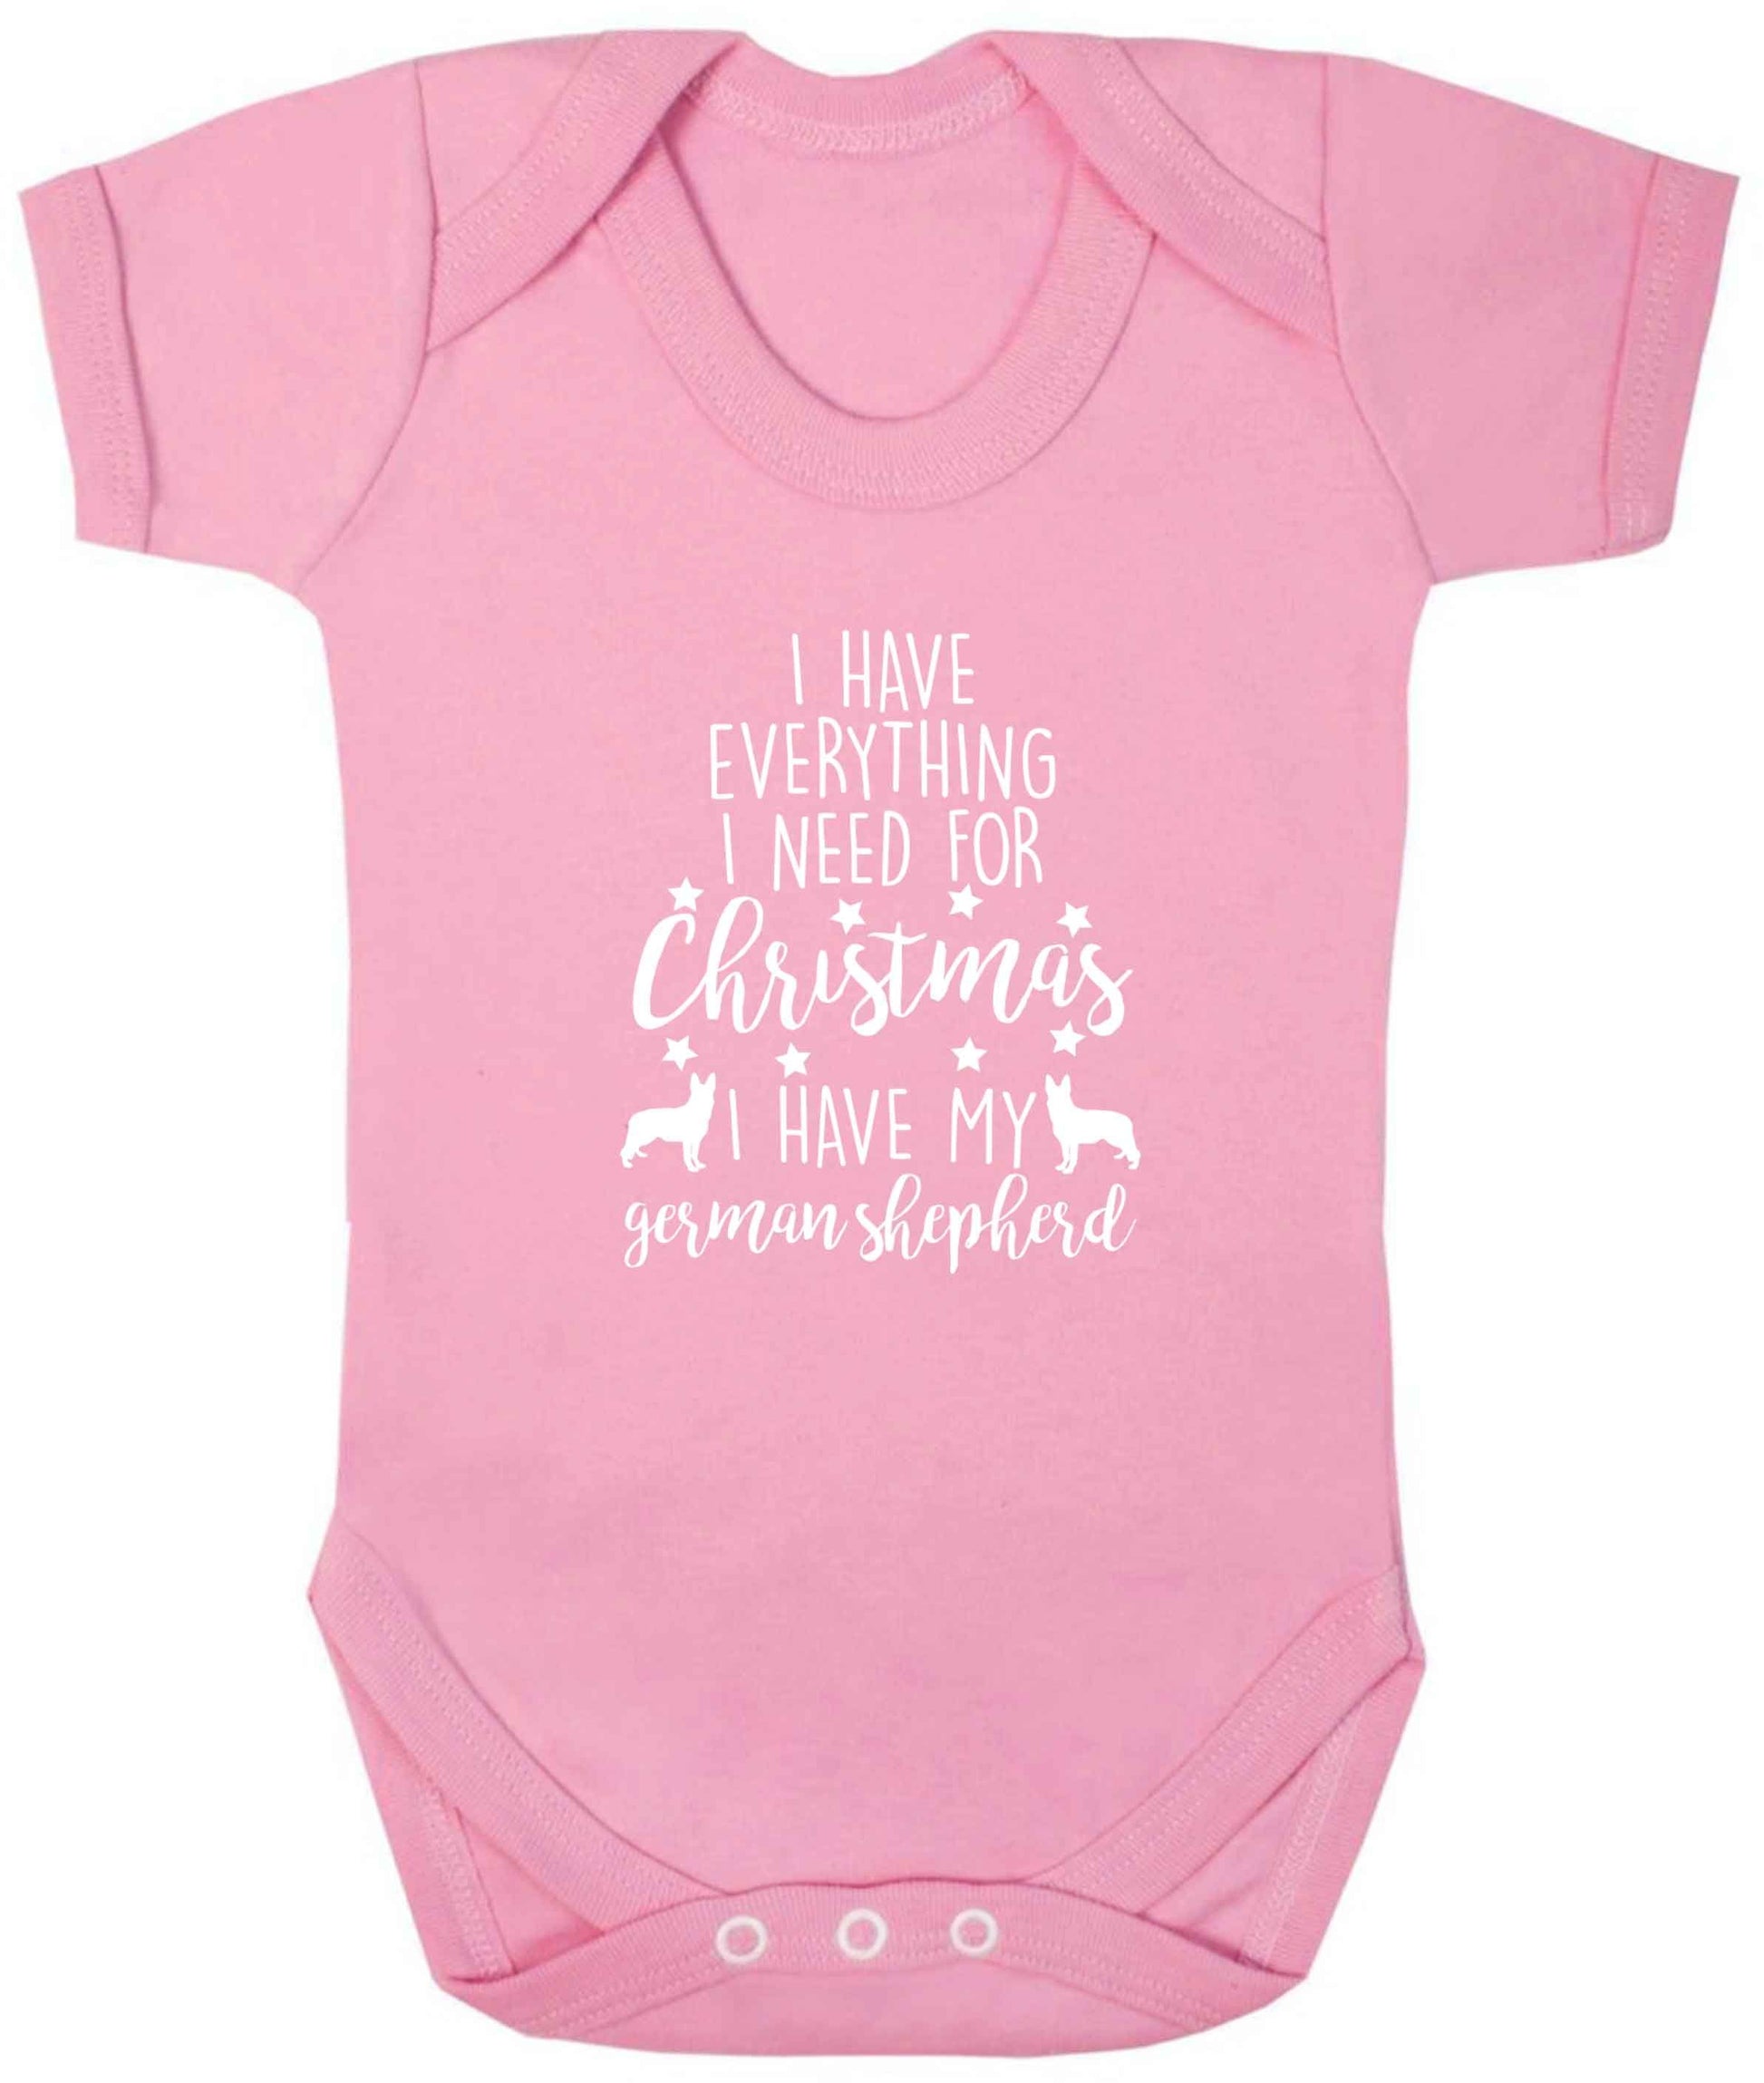 I have everything I need for Christmas I have my german shepherd baby vest pale pink 18-24 months